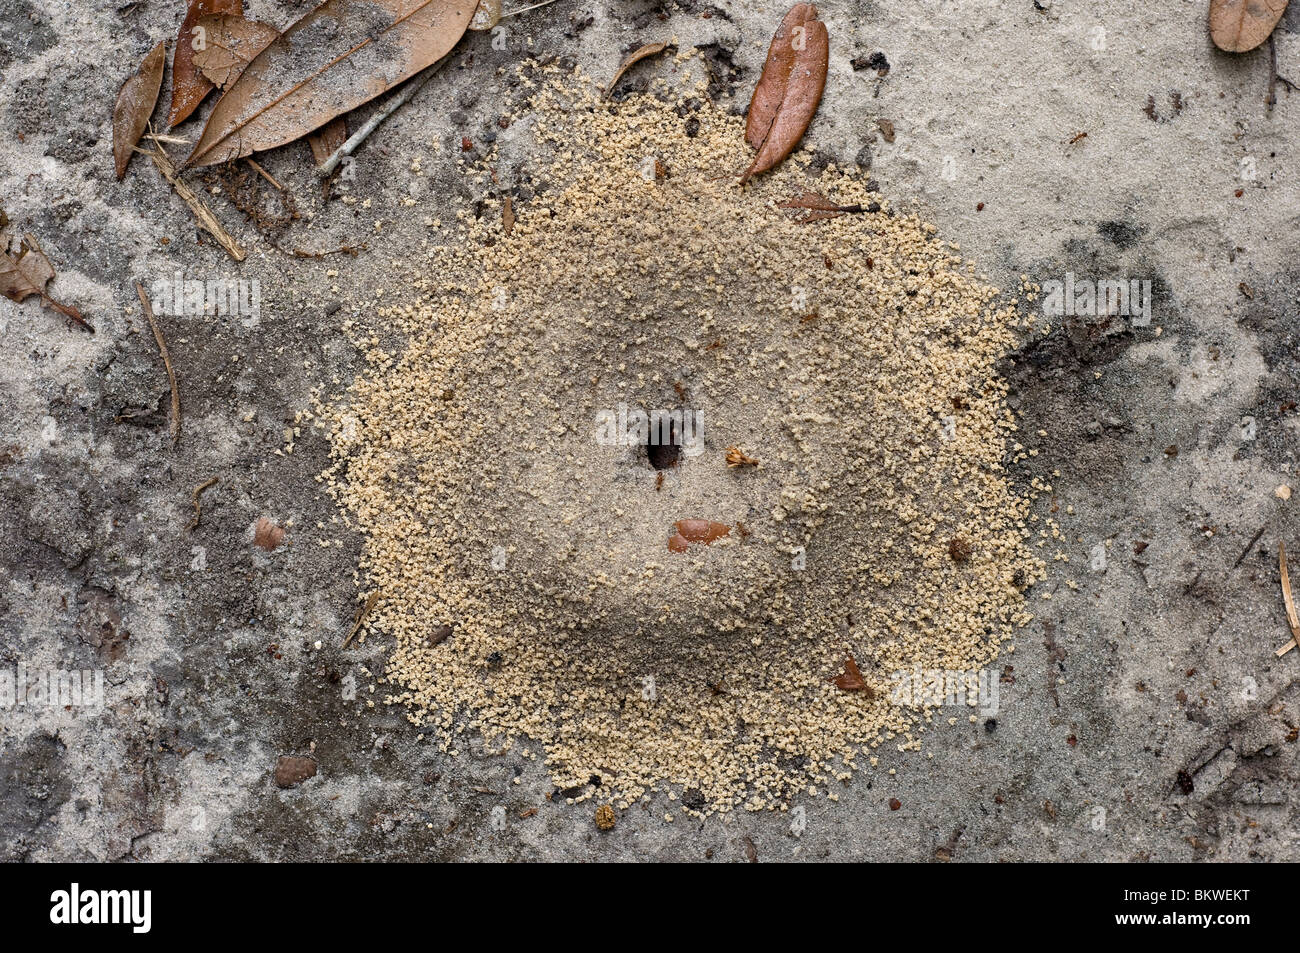 red ant hill in sandy soil Stock Photo